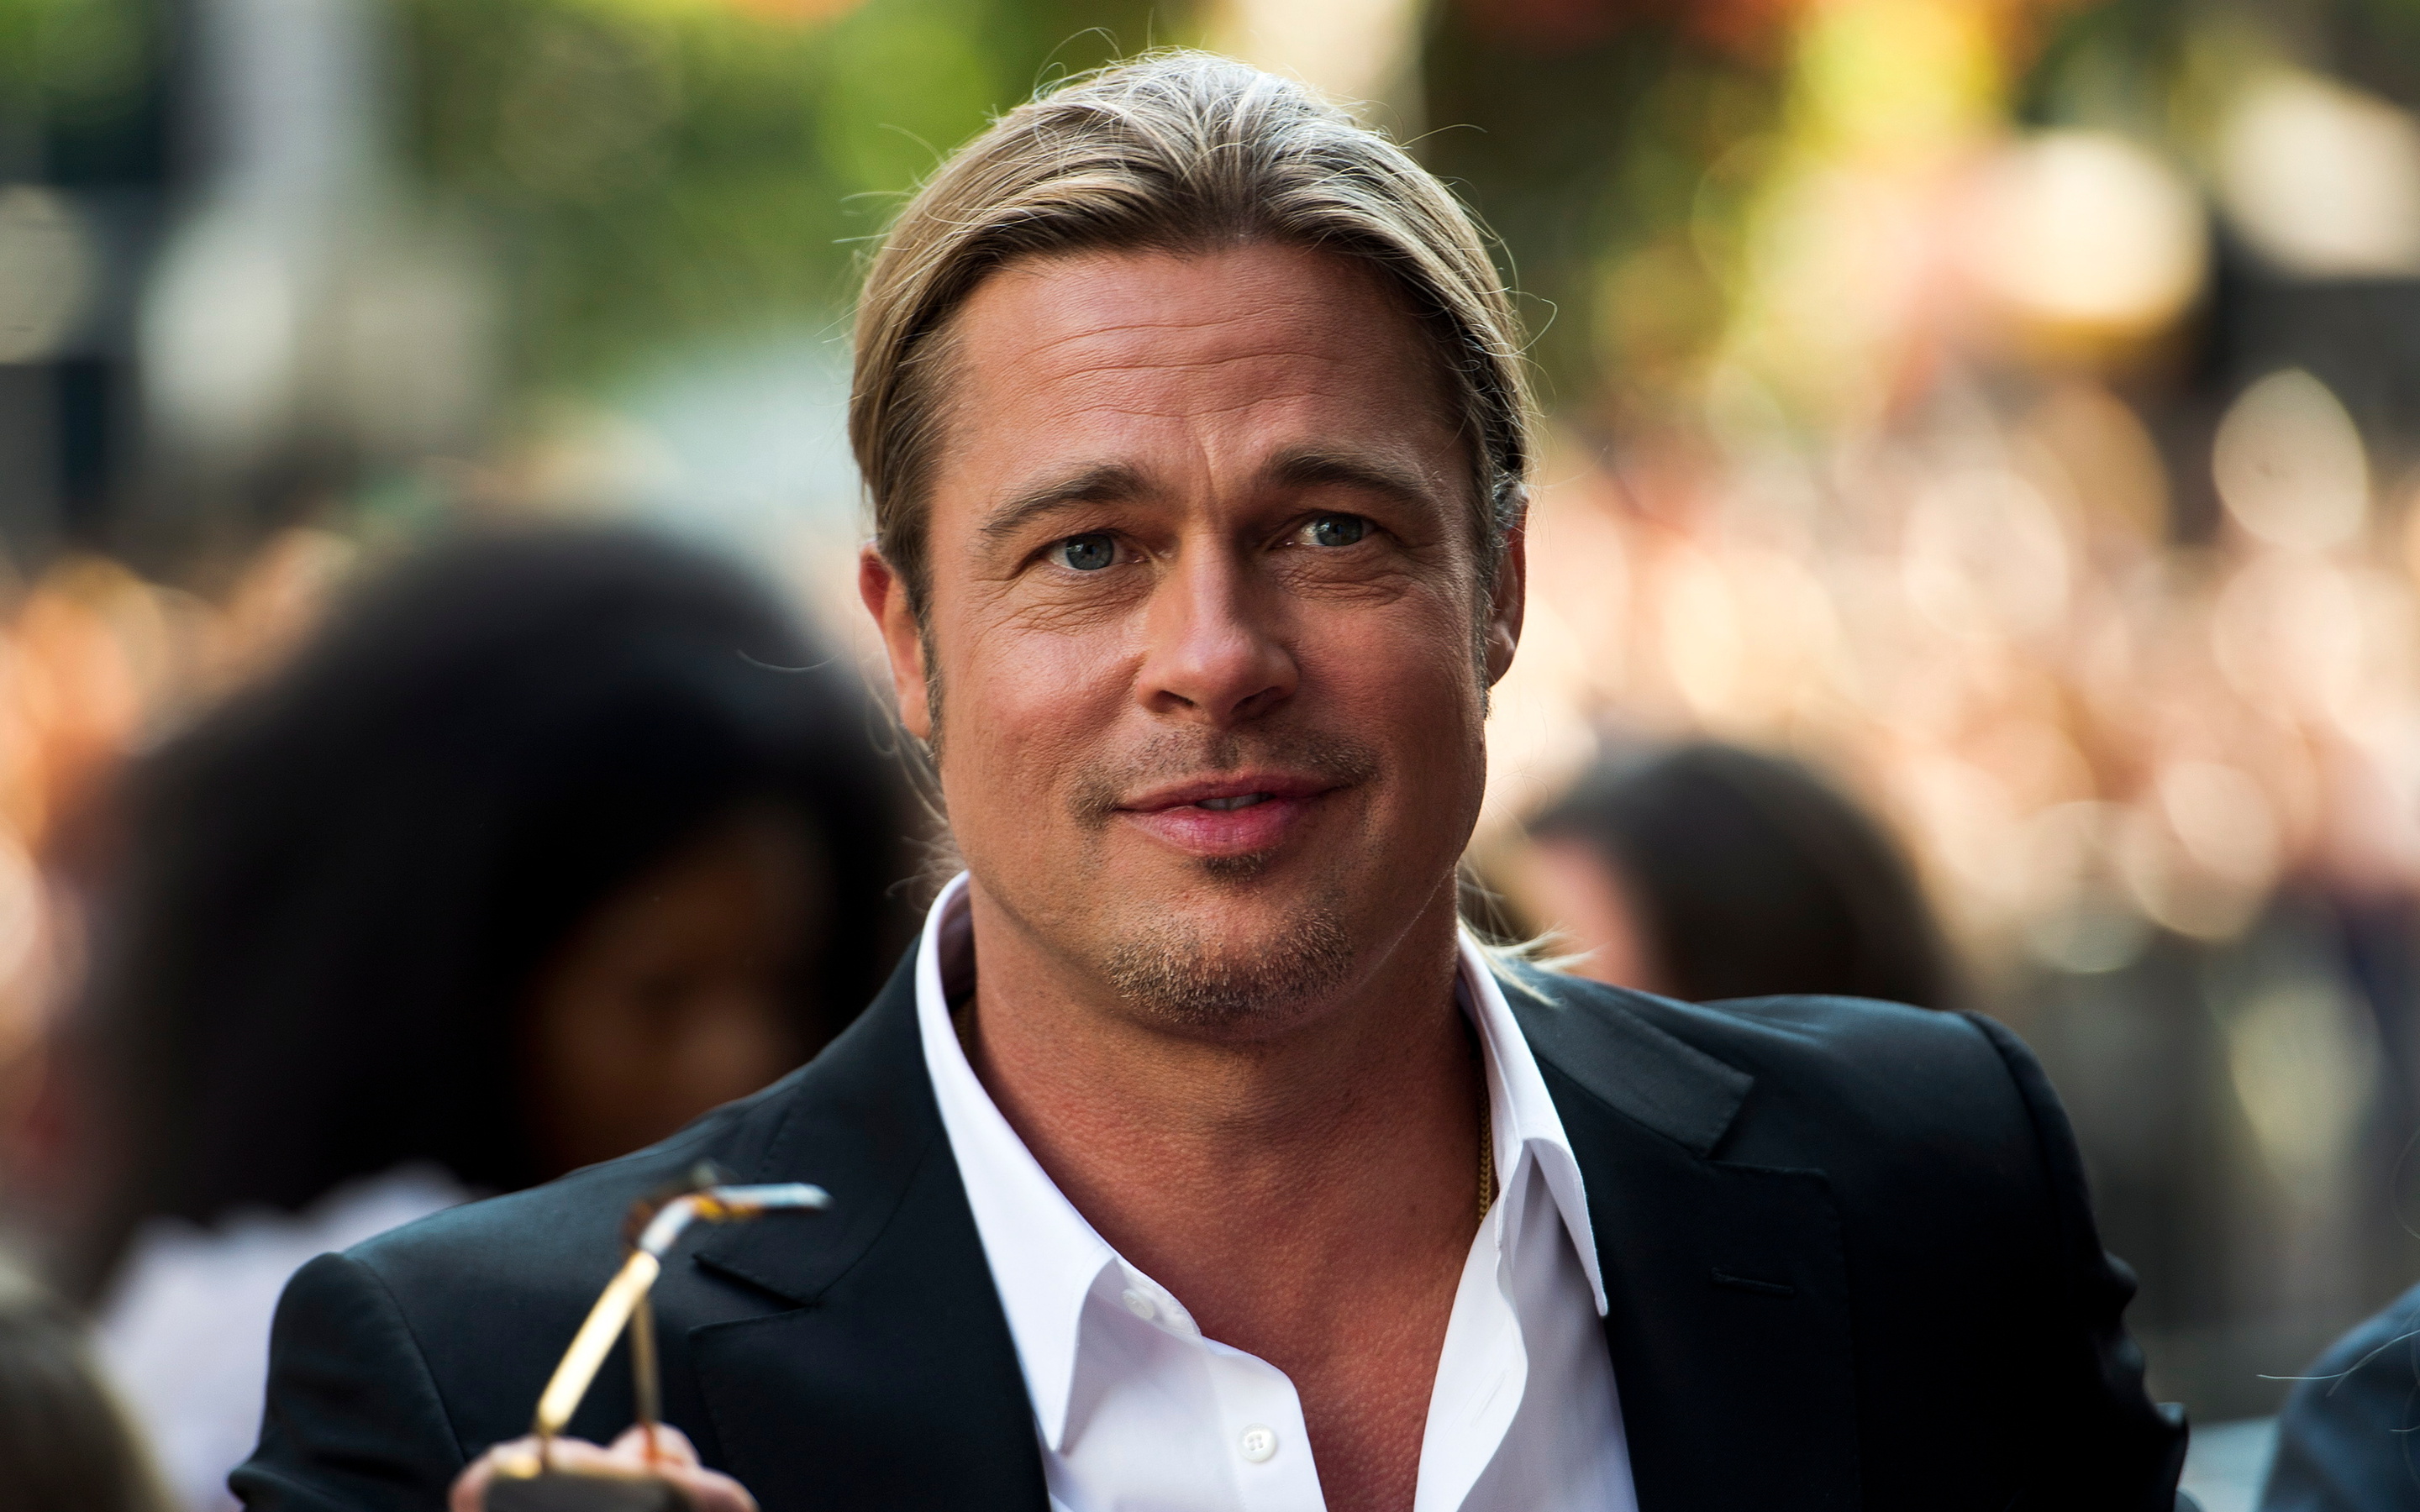 Brad Pitt: Actor and producer, Nominated for multiple awards, headlined major films for over three decades. 2880x1800 HD Background.